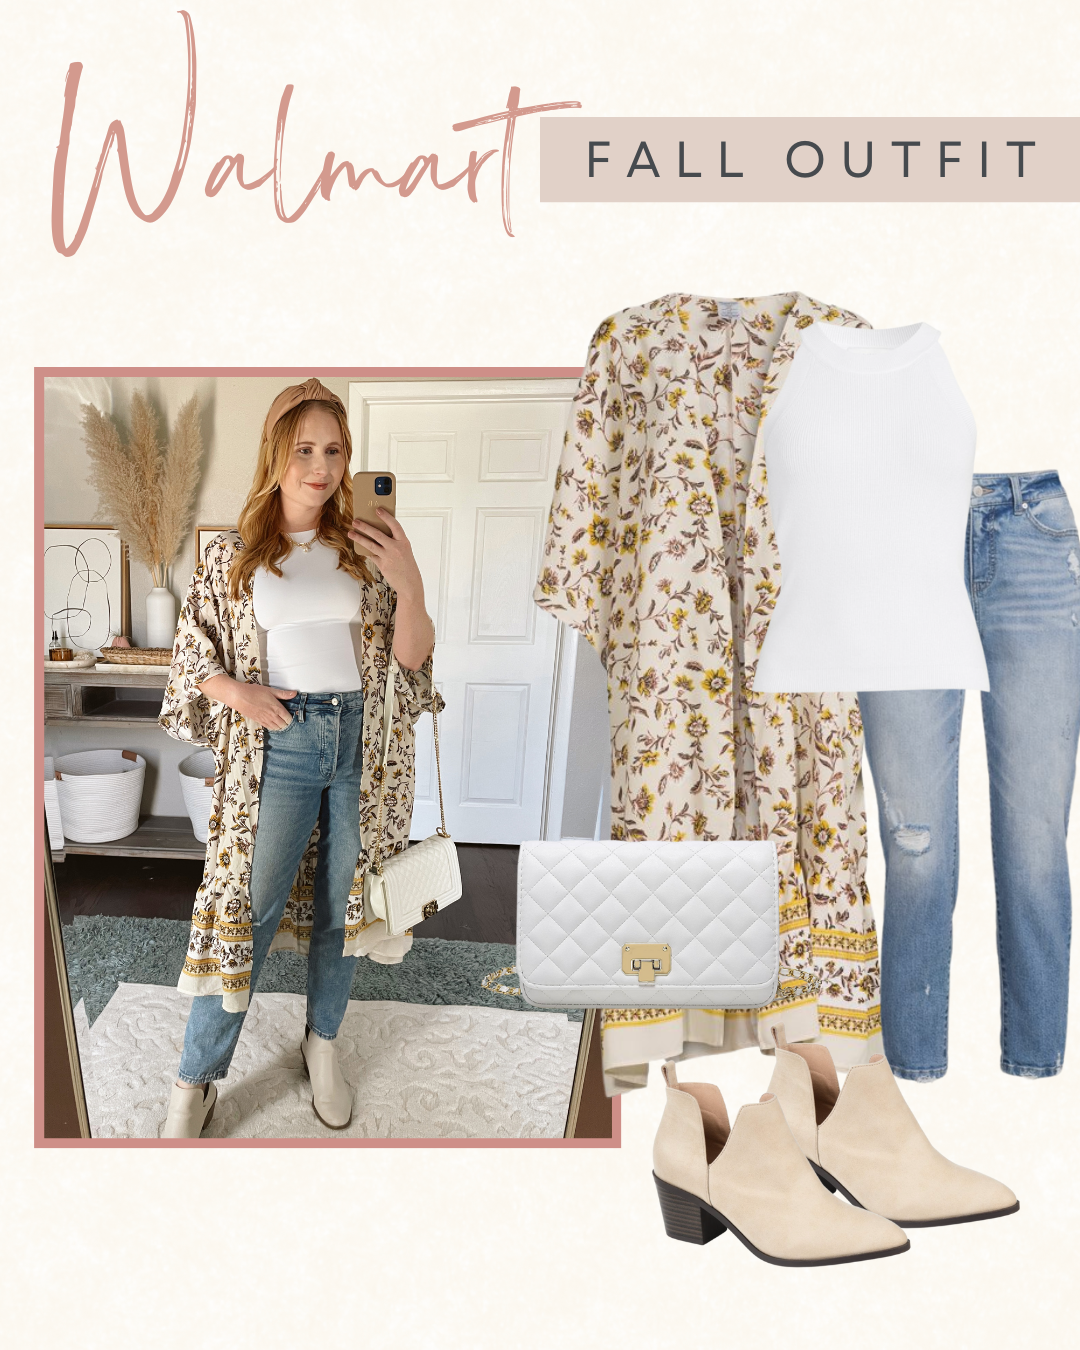 10 Fall Outfits for Women from Walmart - Affordable by Amanda